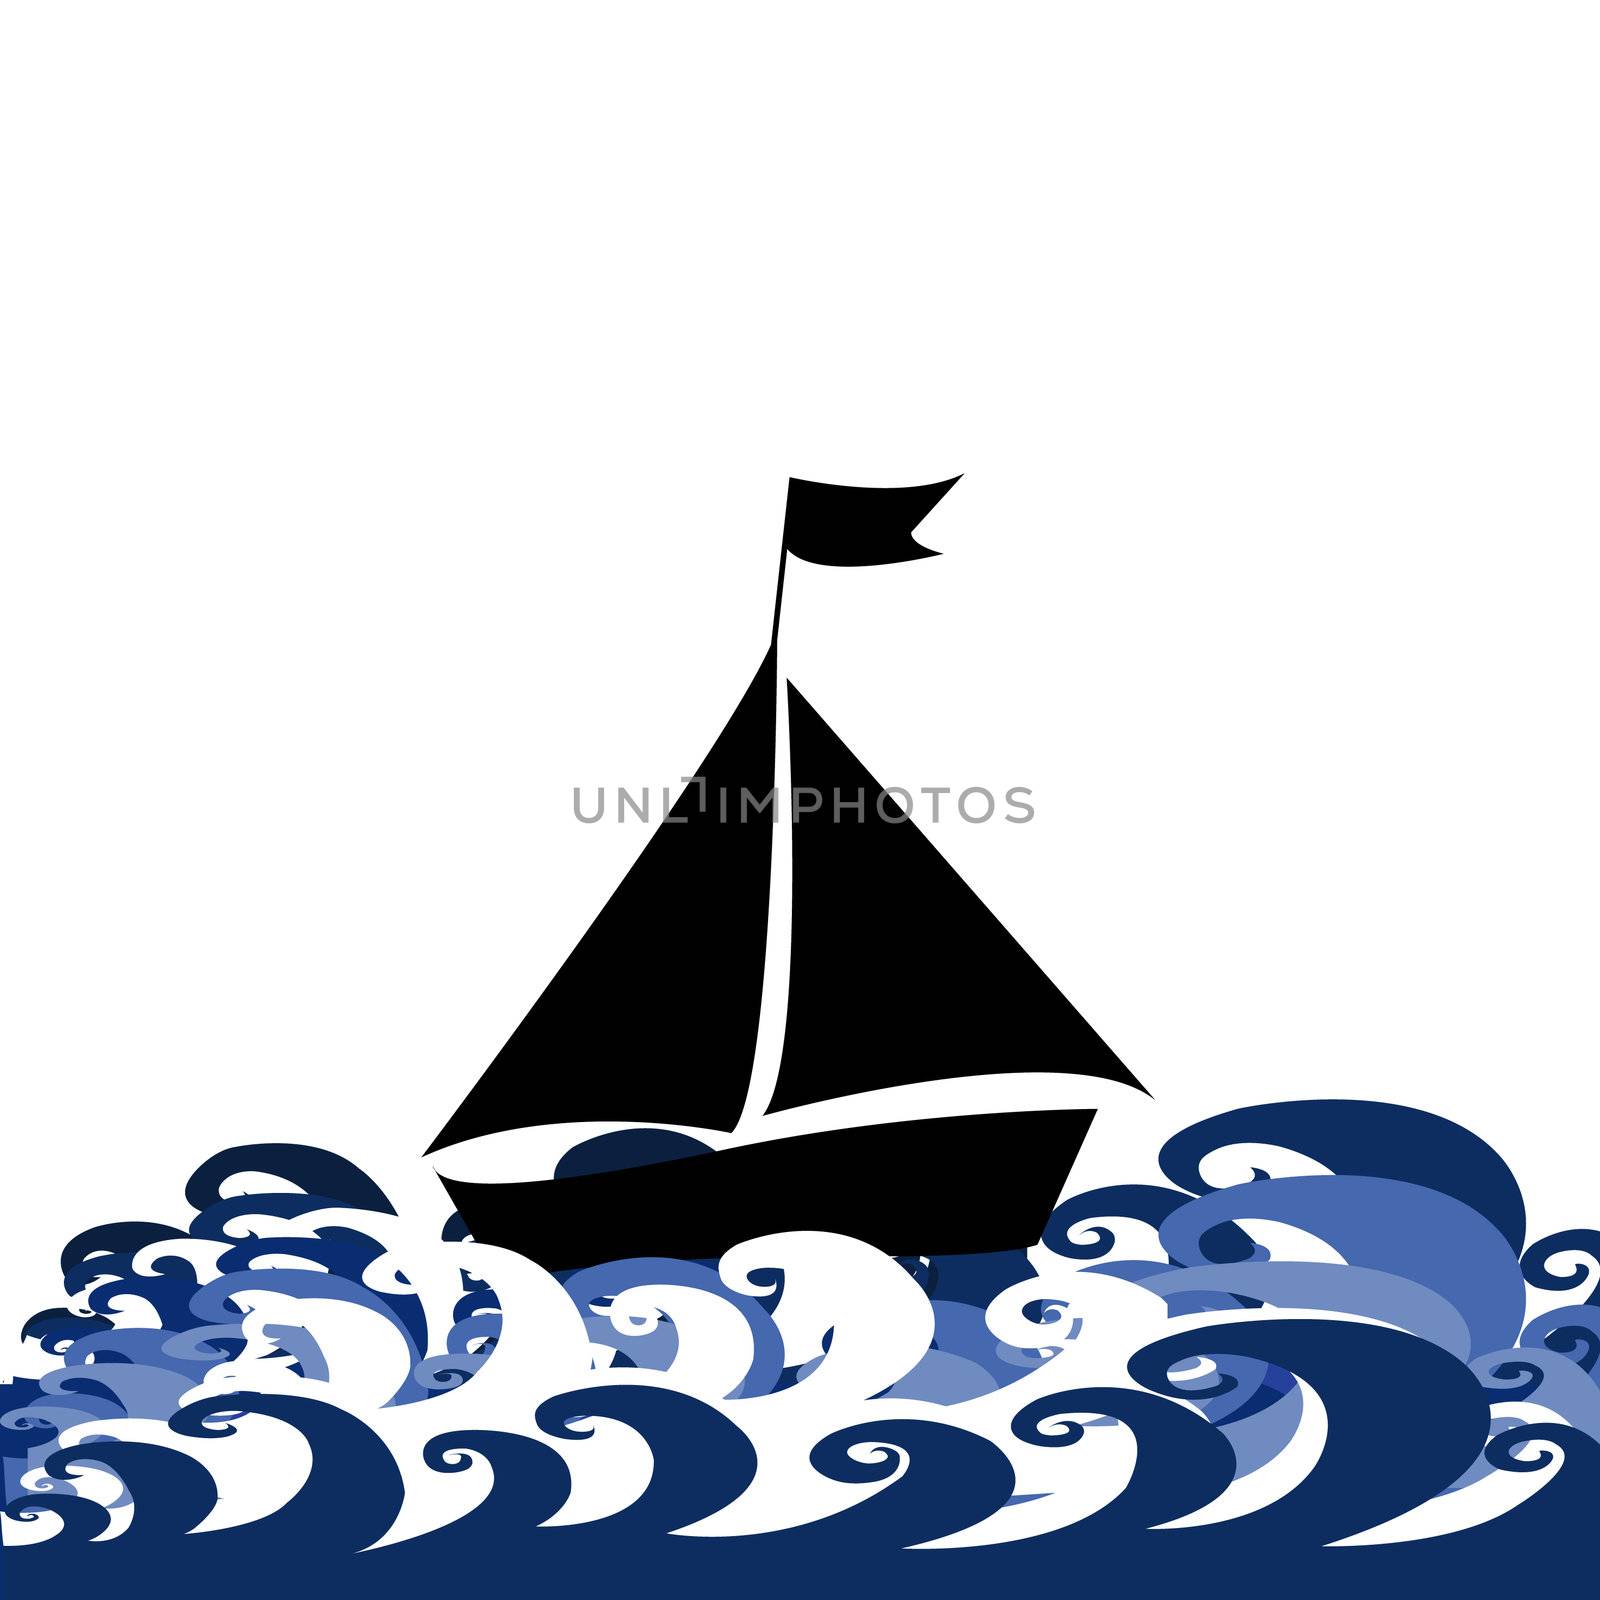 Illustration with sylized ship and waves